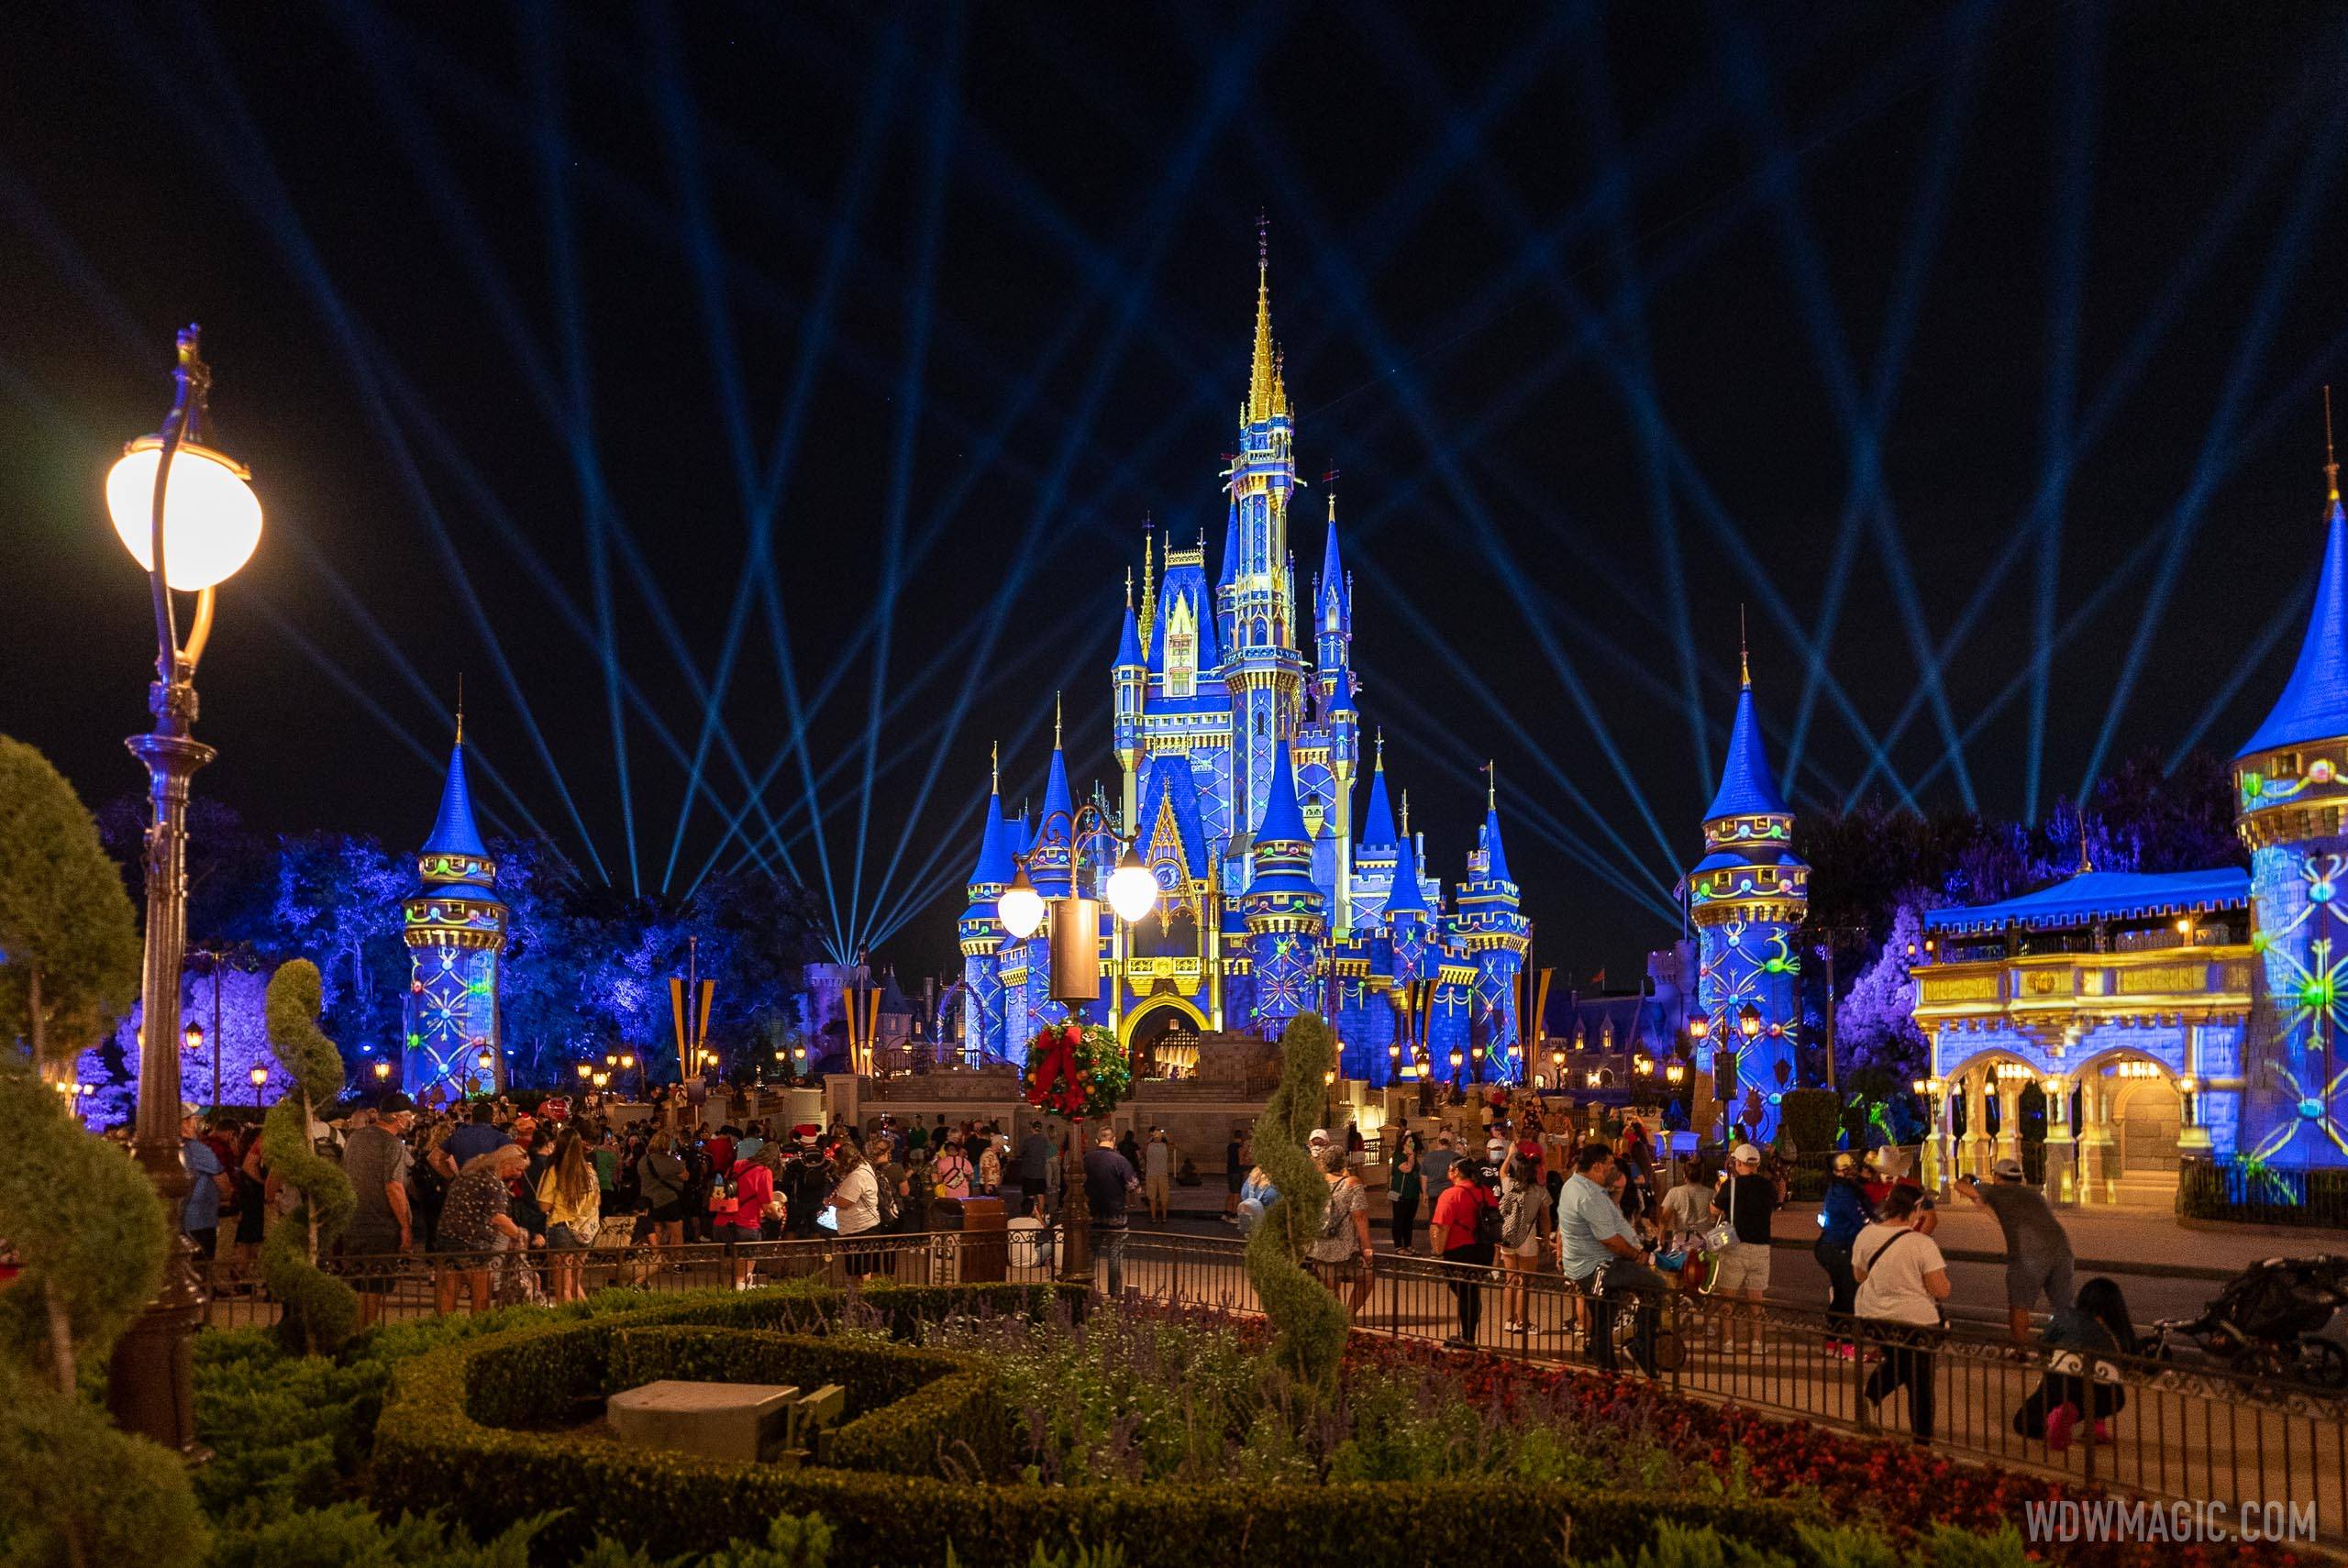 PHOTOS and VIDEO - Projections transform Cinderella Castle for the holidays